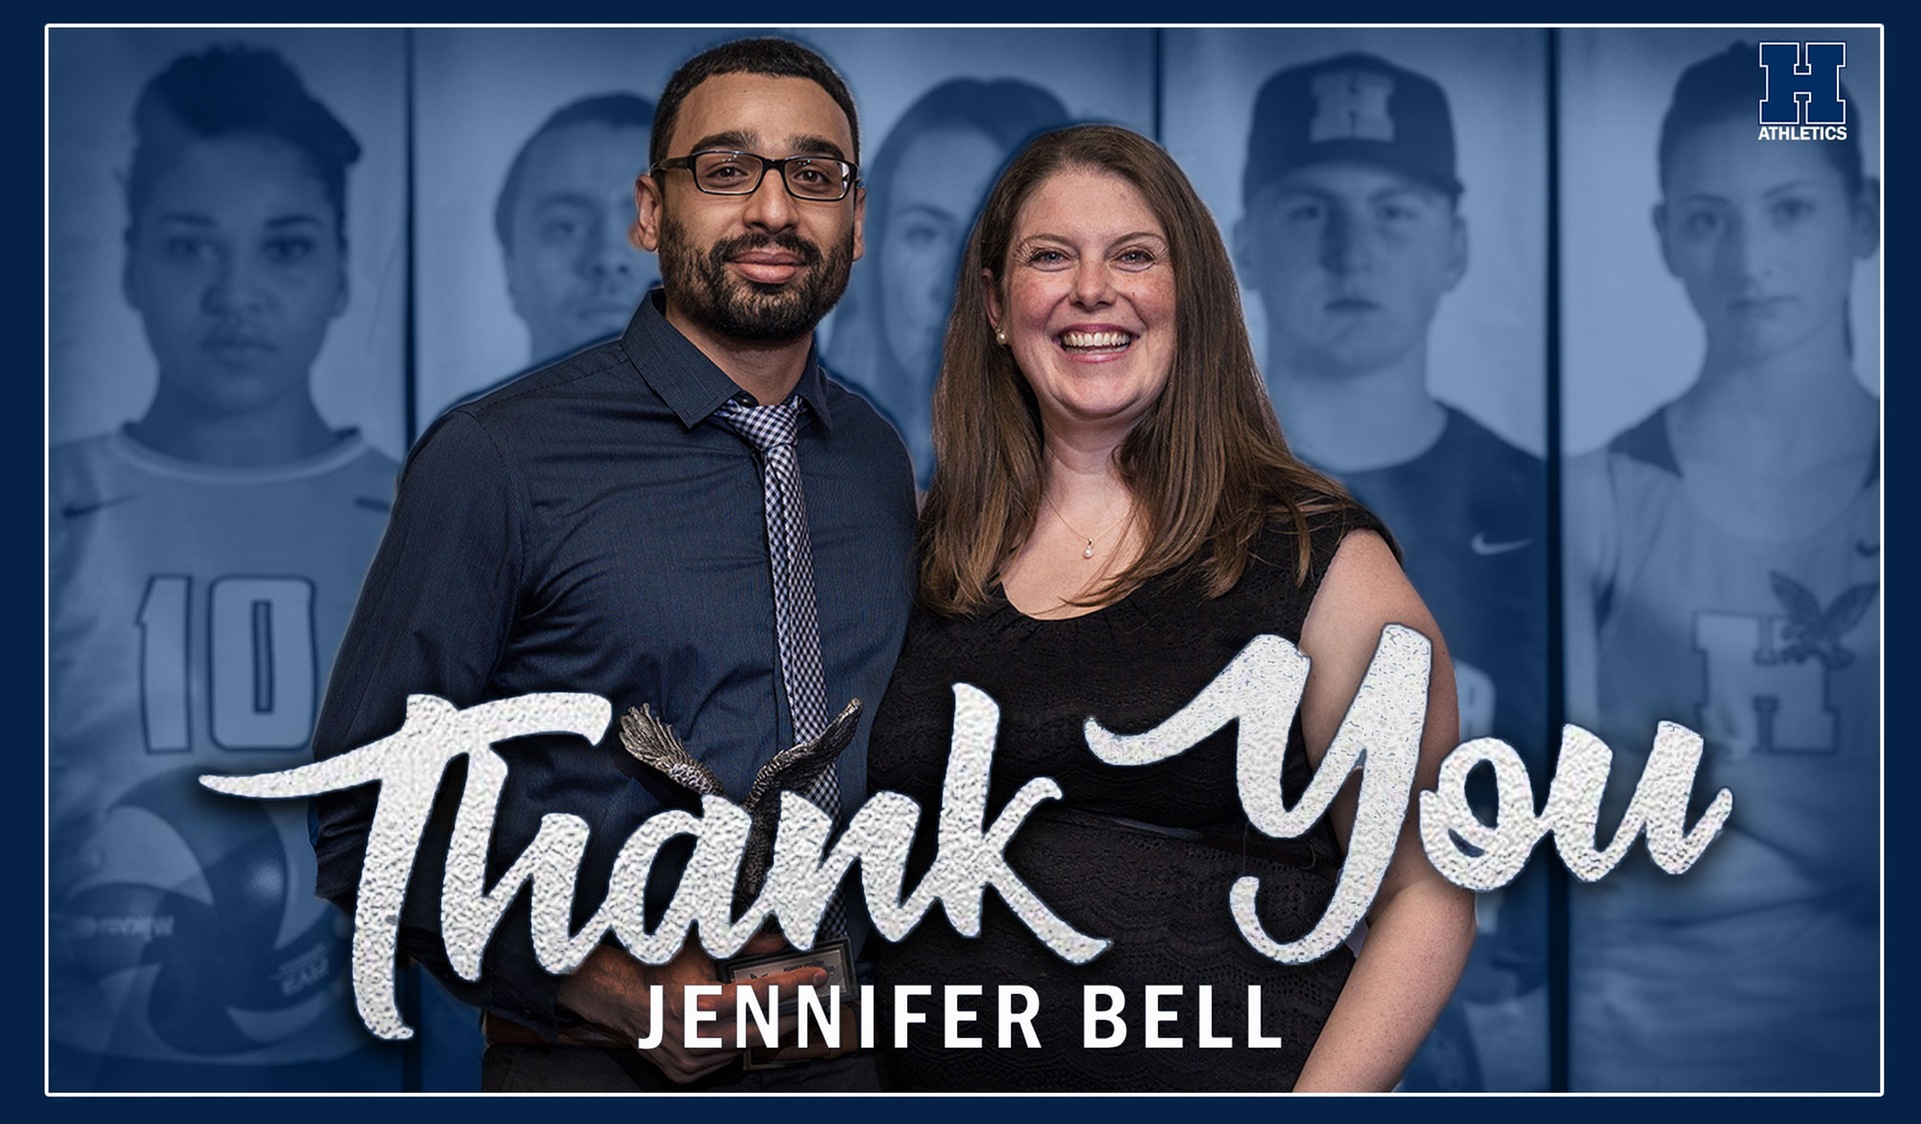 Jennifer Bell leaving Humber Athletics after 15 years